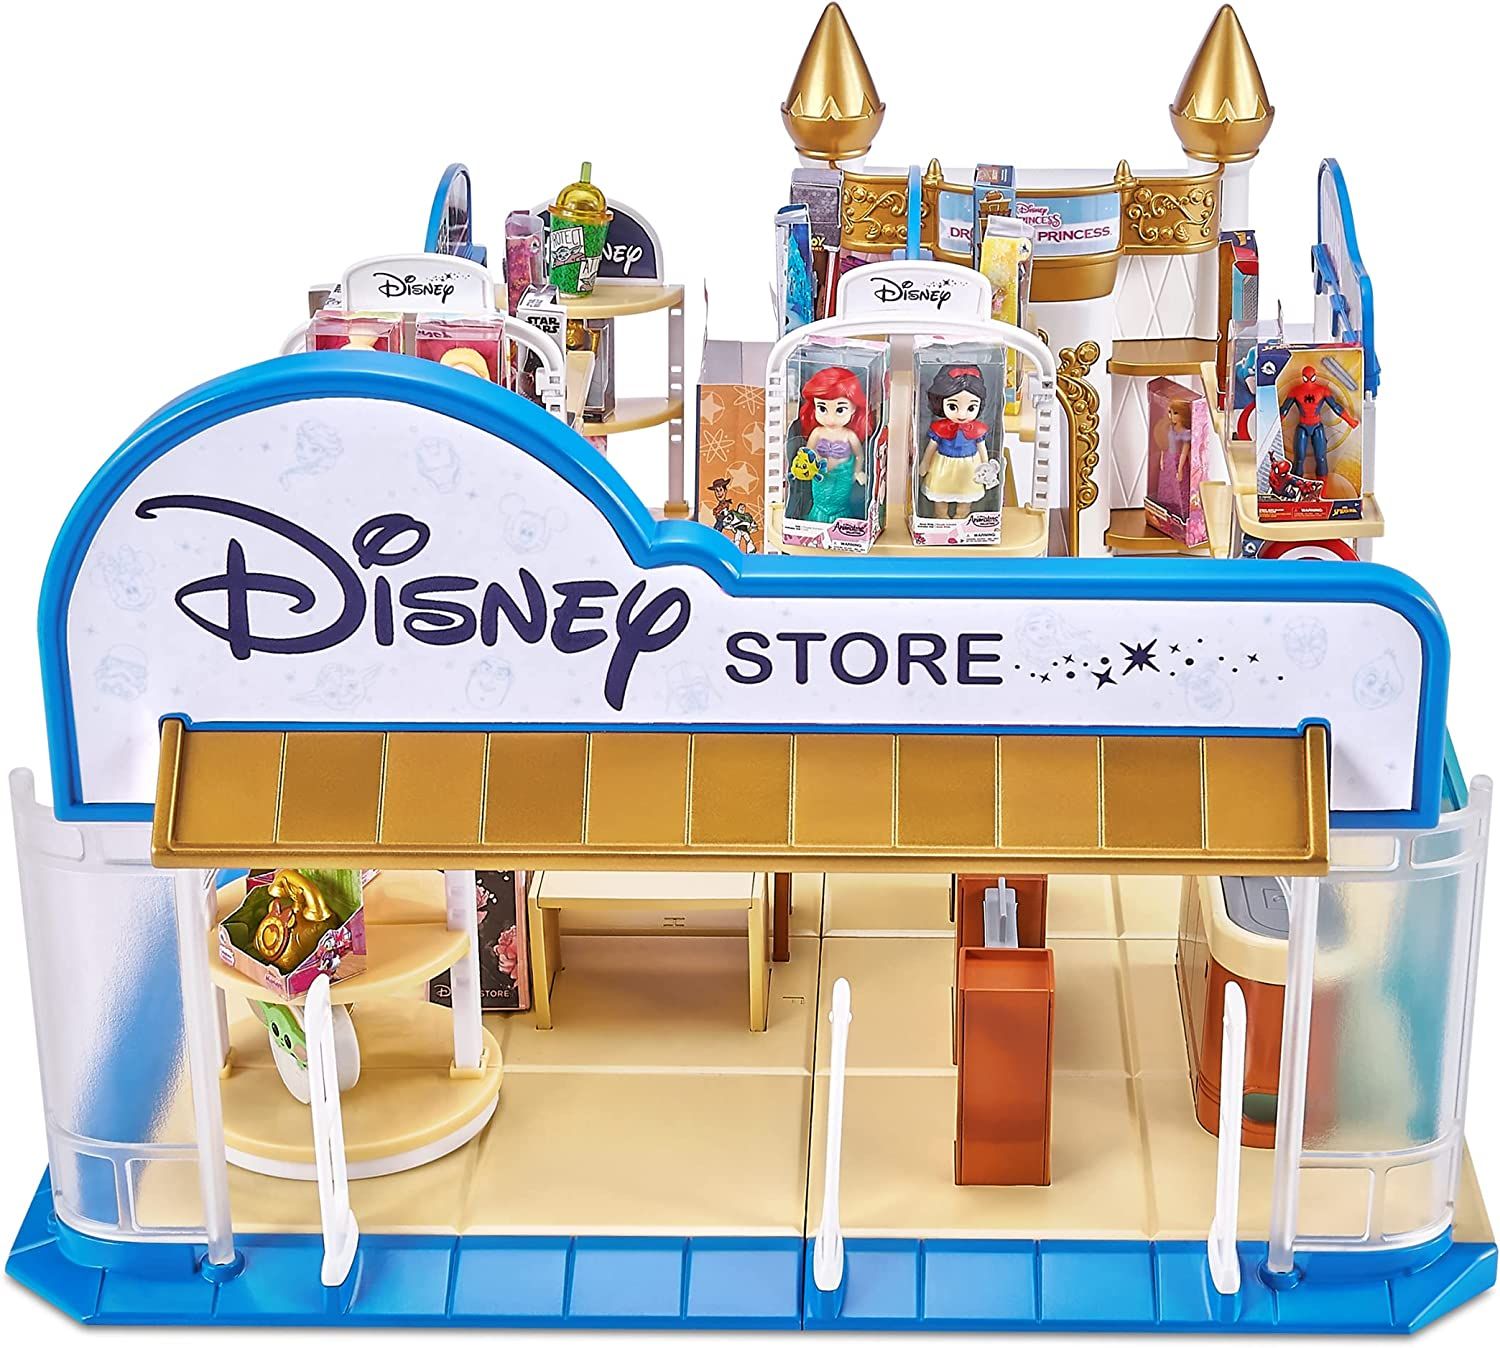 Disney mini brands store is one of the best Disney collectibles